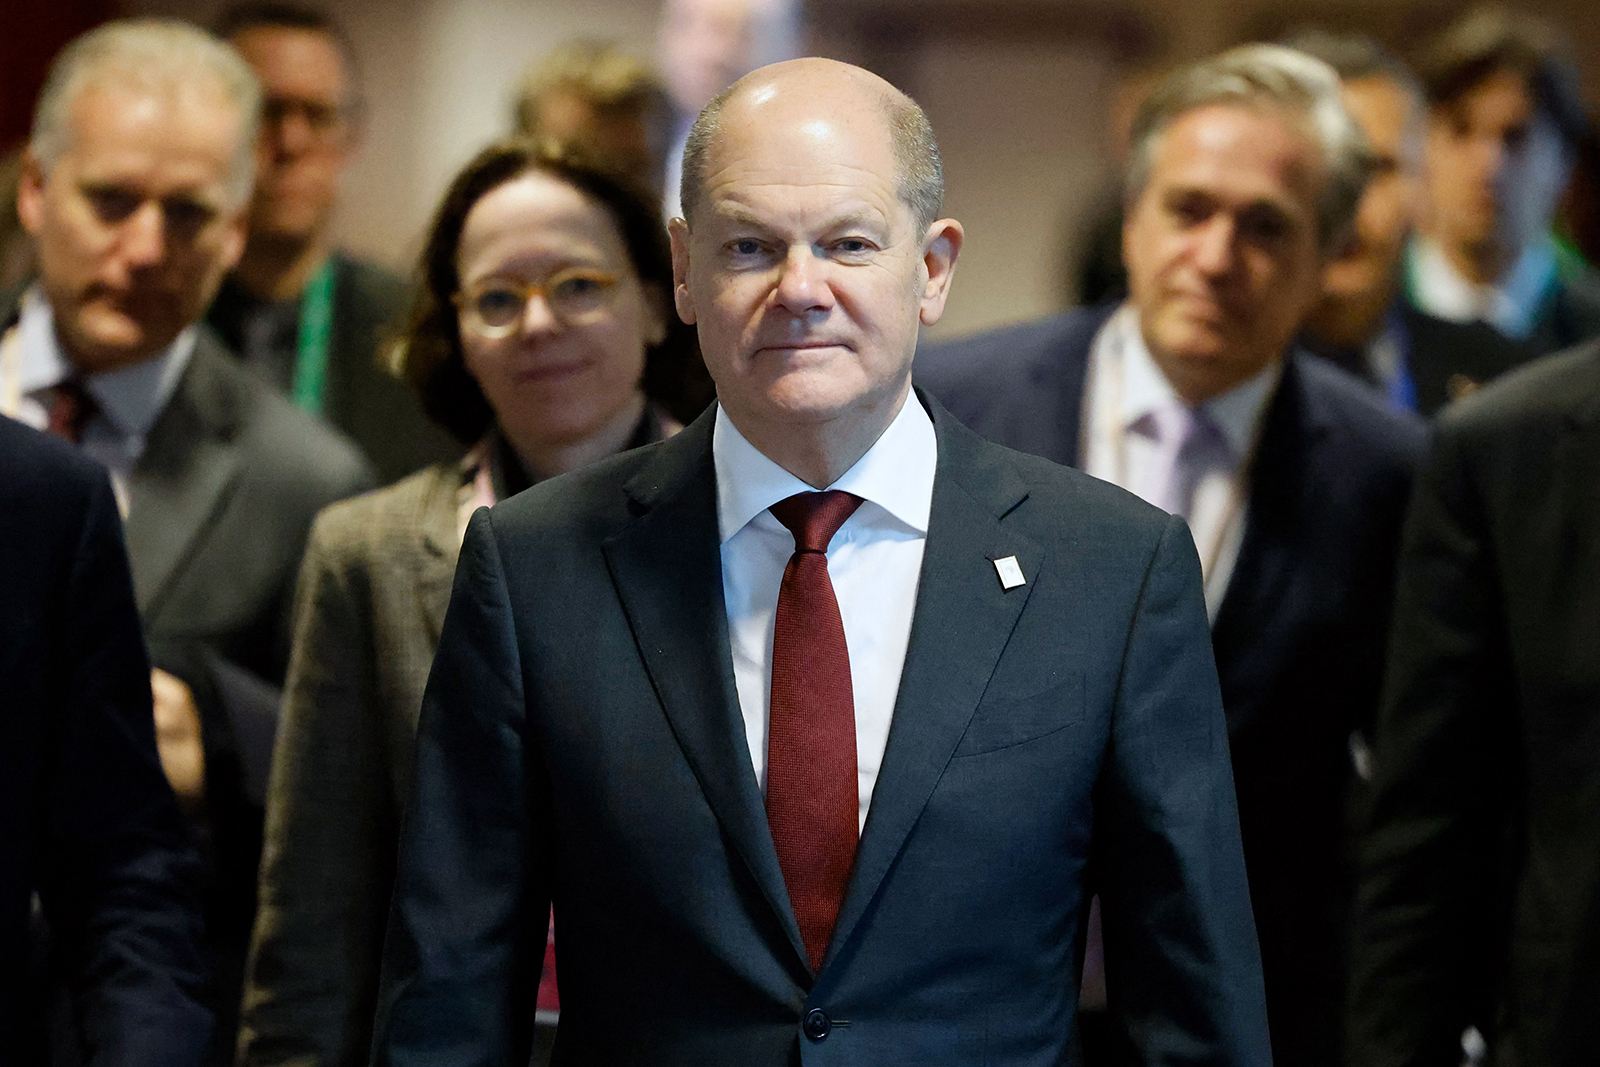 Germany's Chancellor Olaf Scholz leaves after a EU Summit at the EU headquarters, in Brussels, Belgium, on March 24.